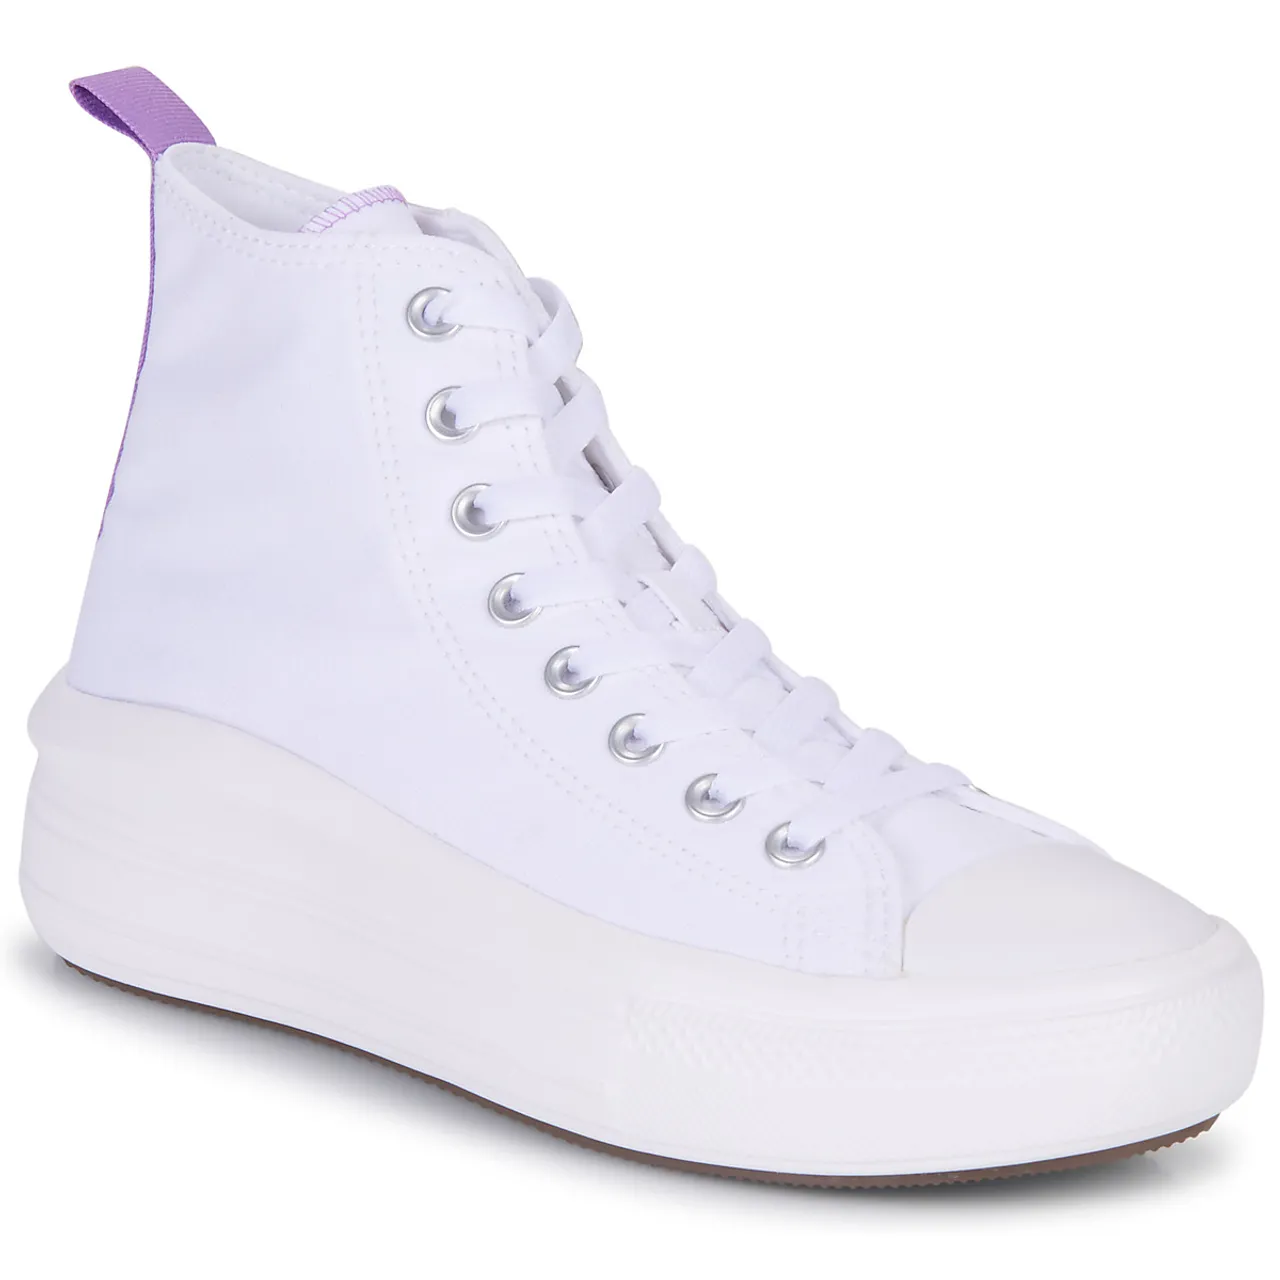 Converse  Chuck Taylor All Star Move Platform Foundation Hi  girls's Children's Shoes (High-top Trainers) in White